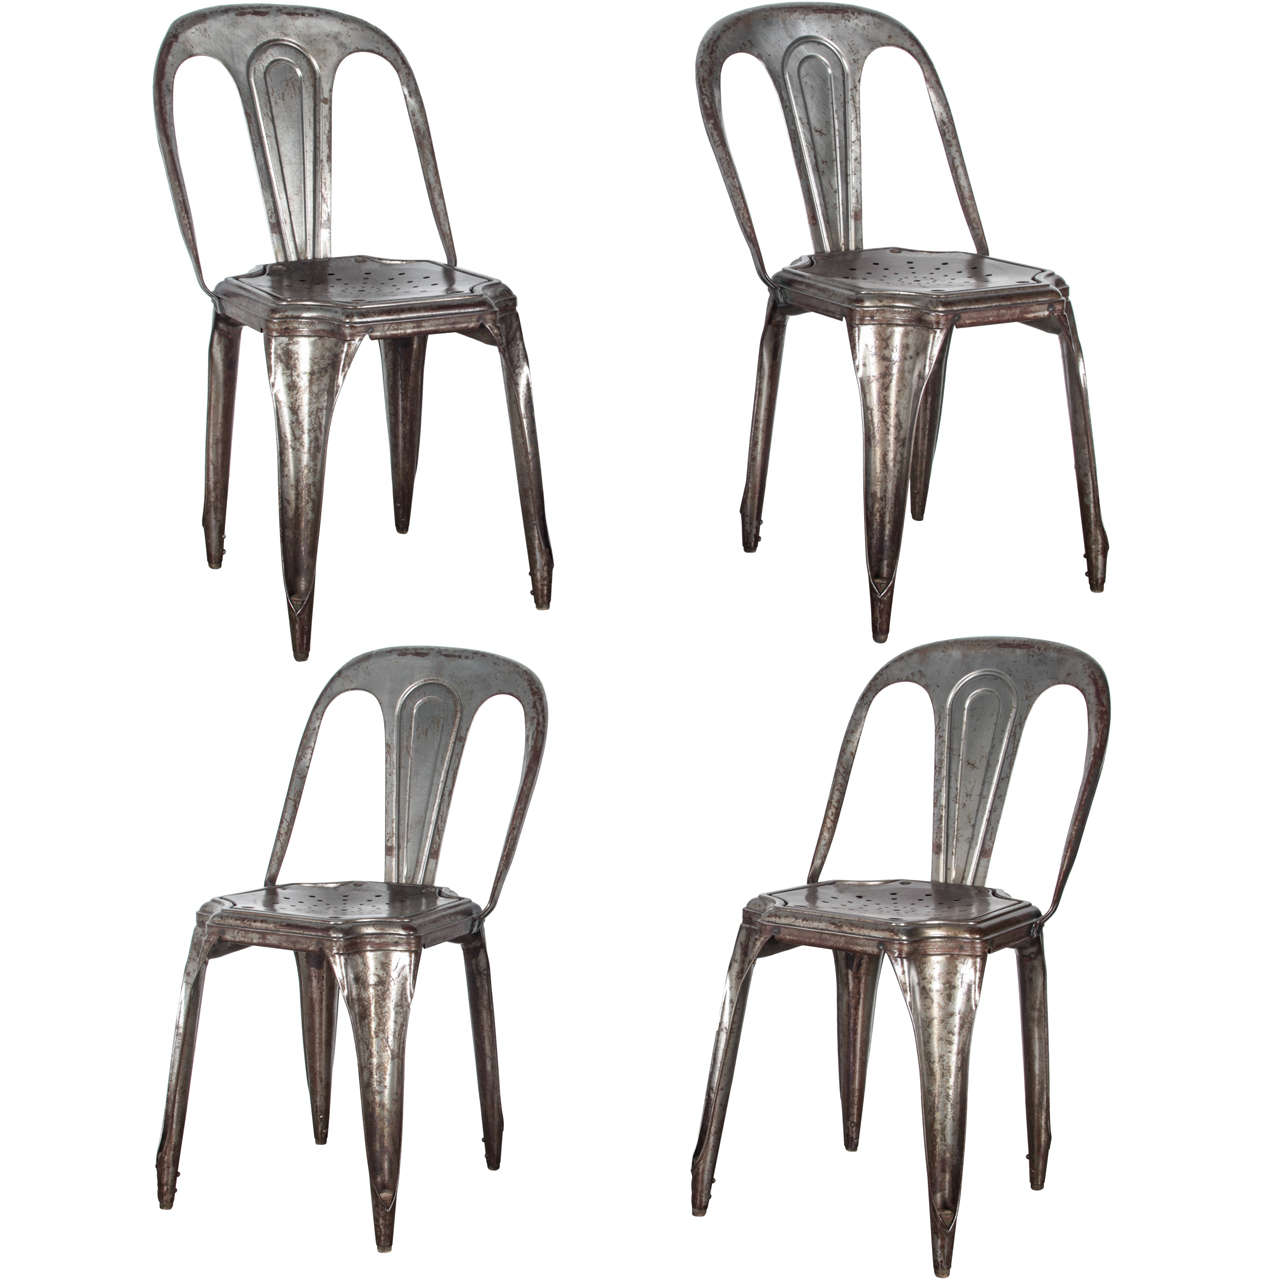 Set of Four Metal Stacking Chairs by Tolix